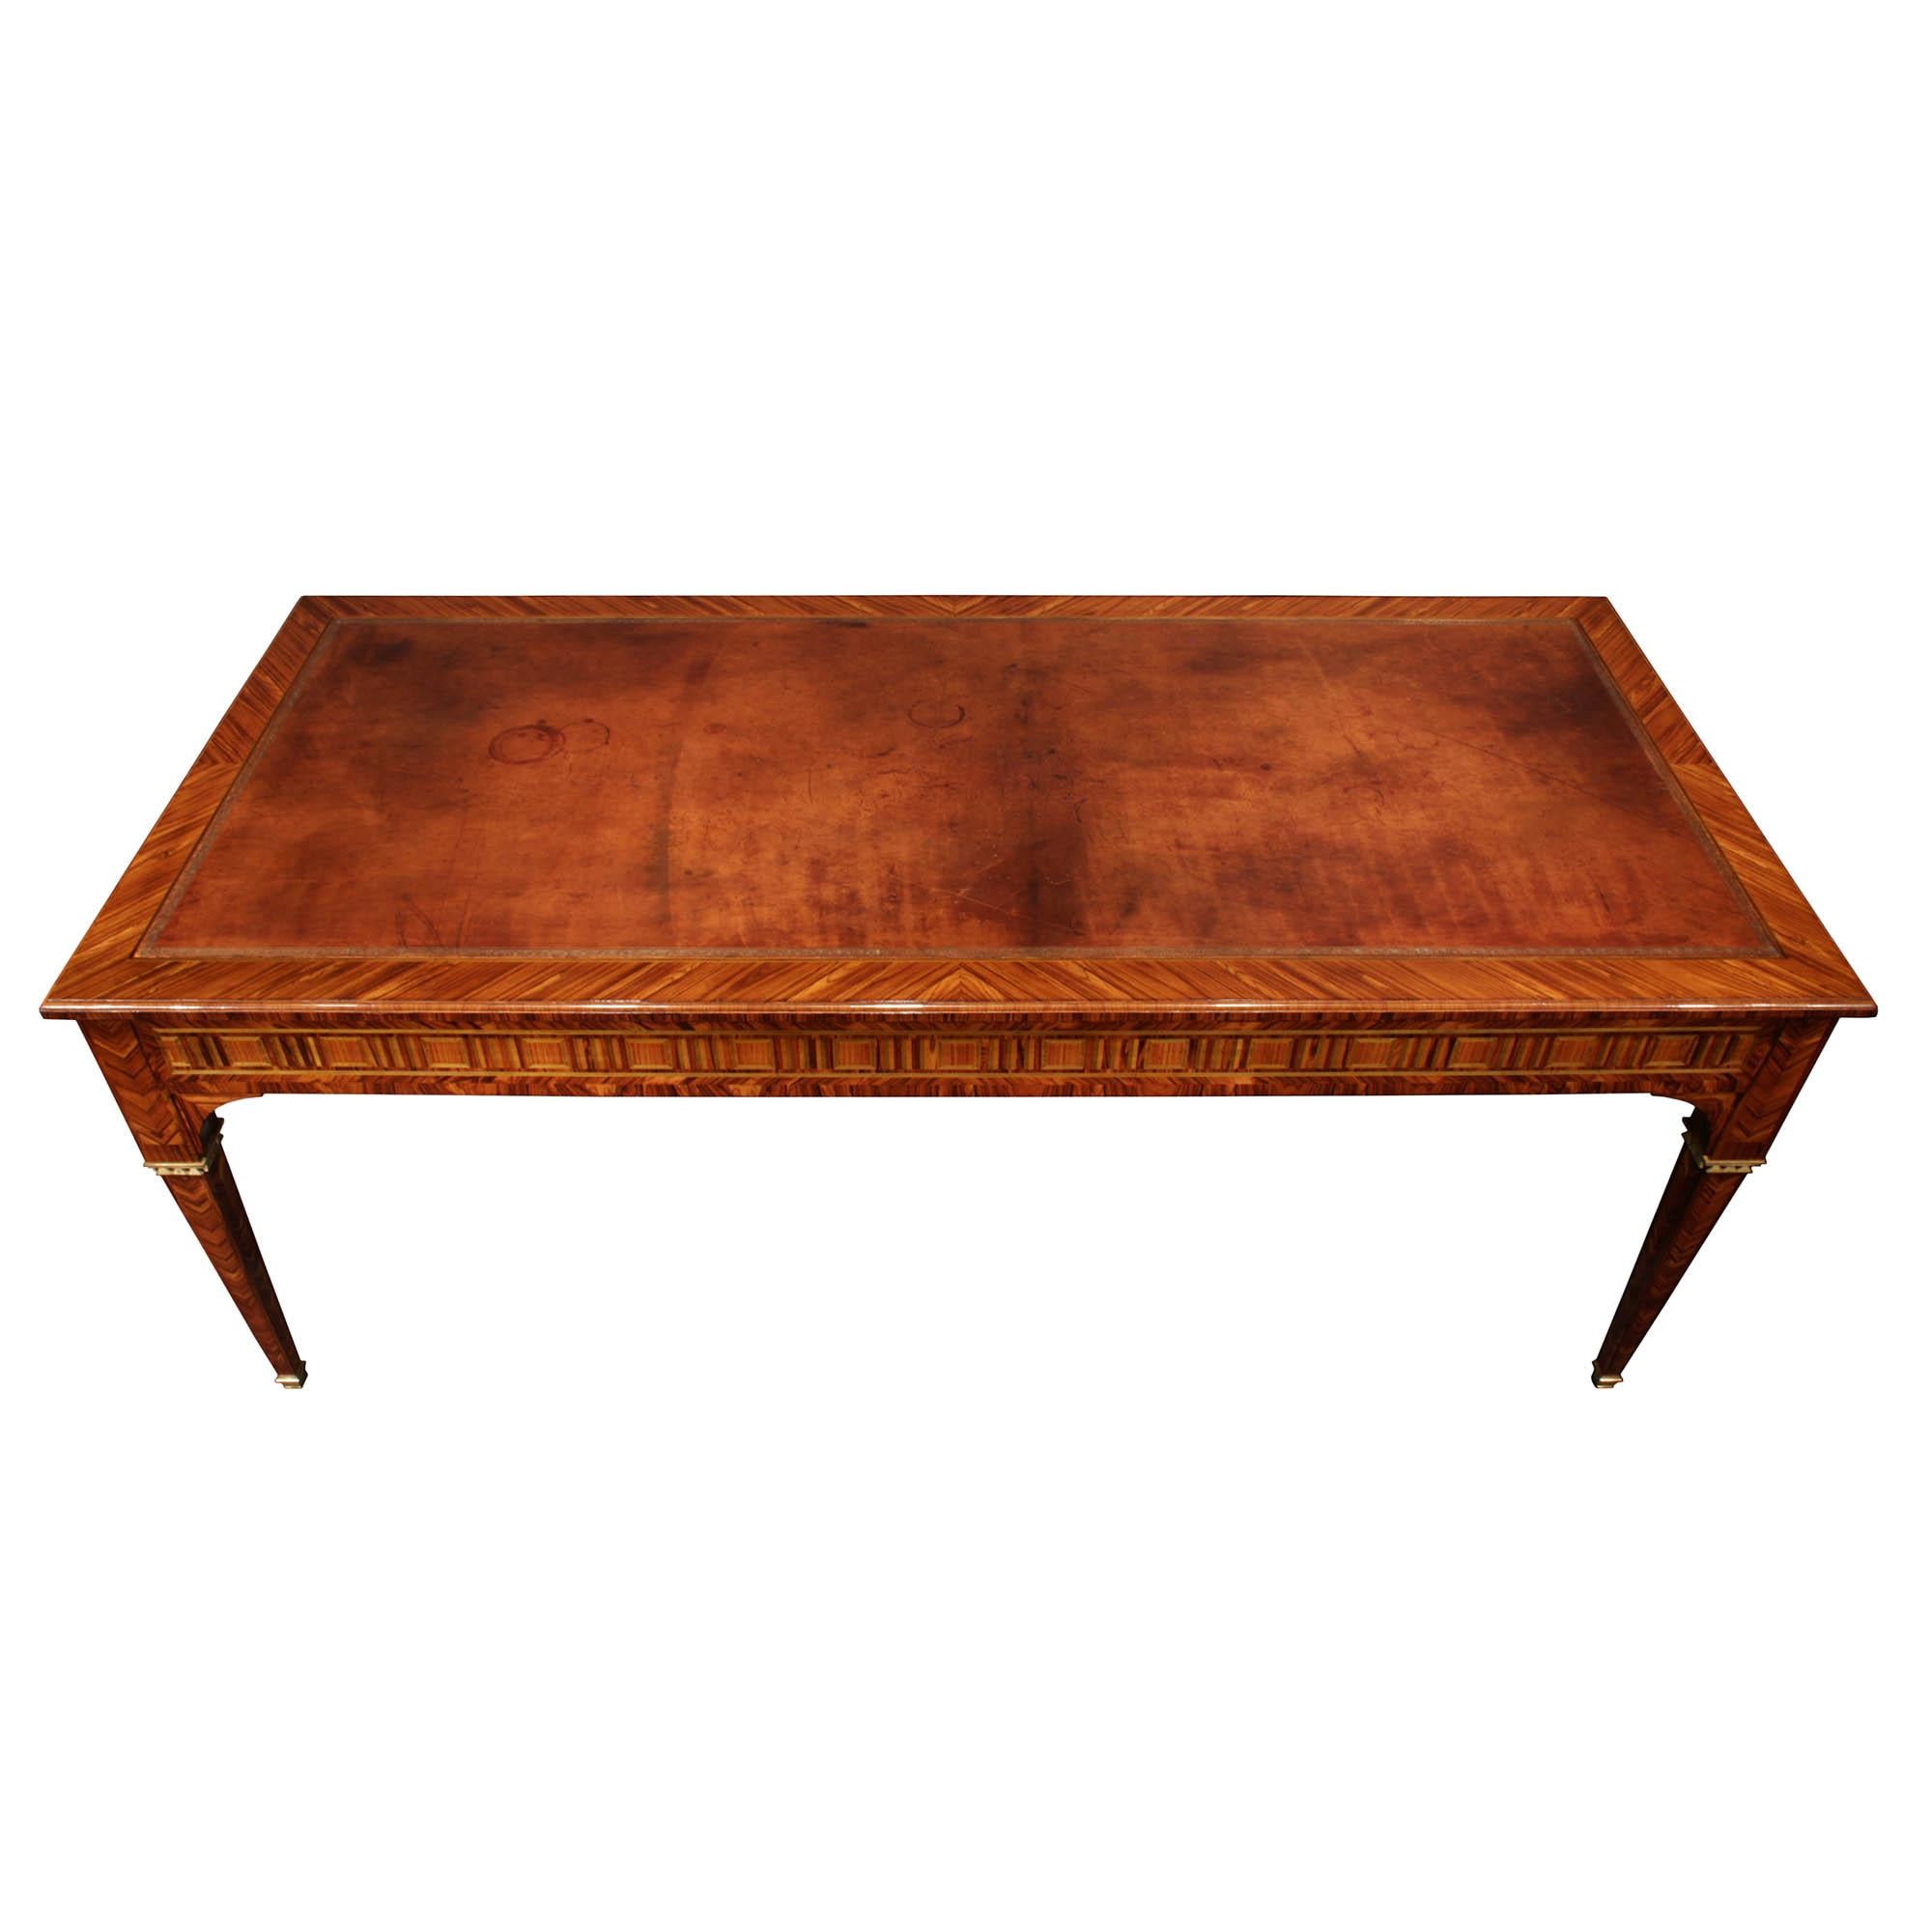 A superb French mid 19th century Louis XVI st. herringbone design tulipwood center table. The table is raised on elegantly tapered legs with ormolu sabots and dentil top crown. The apron is decorated with a geometric charmwood inlay, at each side.